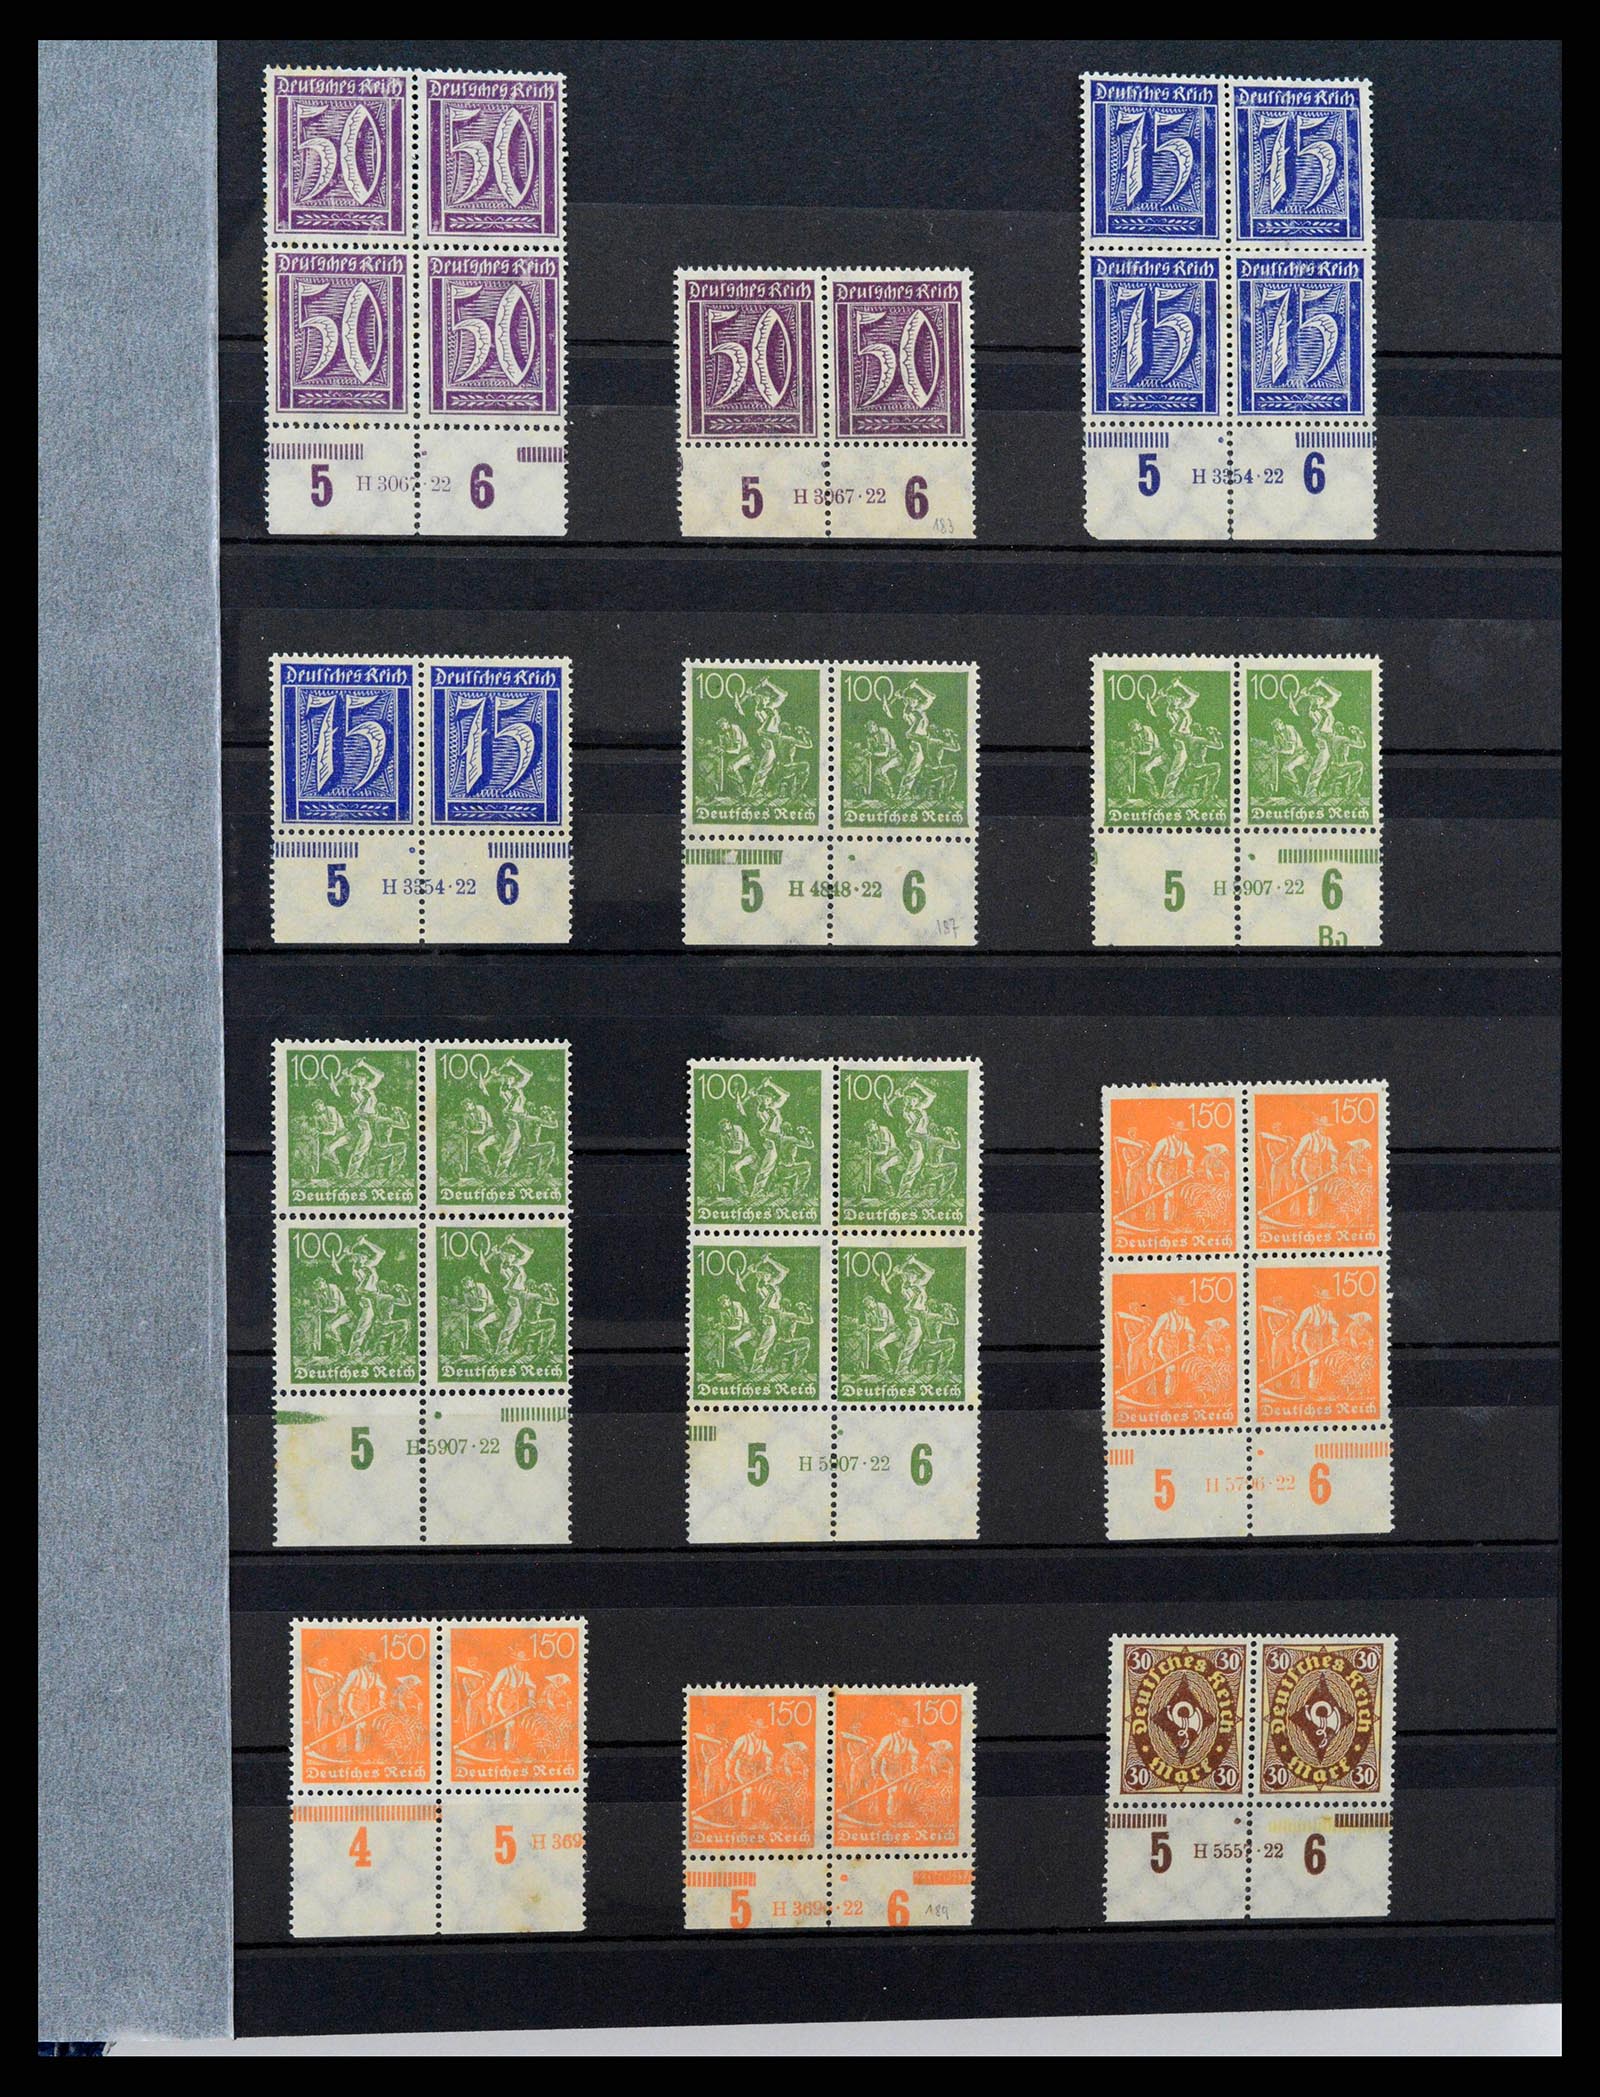 38417 0002 - Stamp collection 38417 German Reich infla 1922-1923.